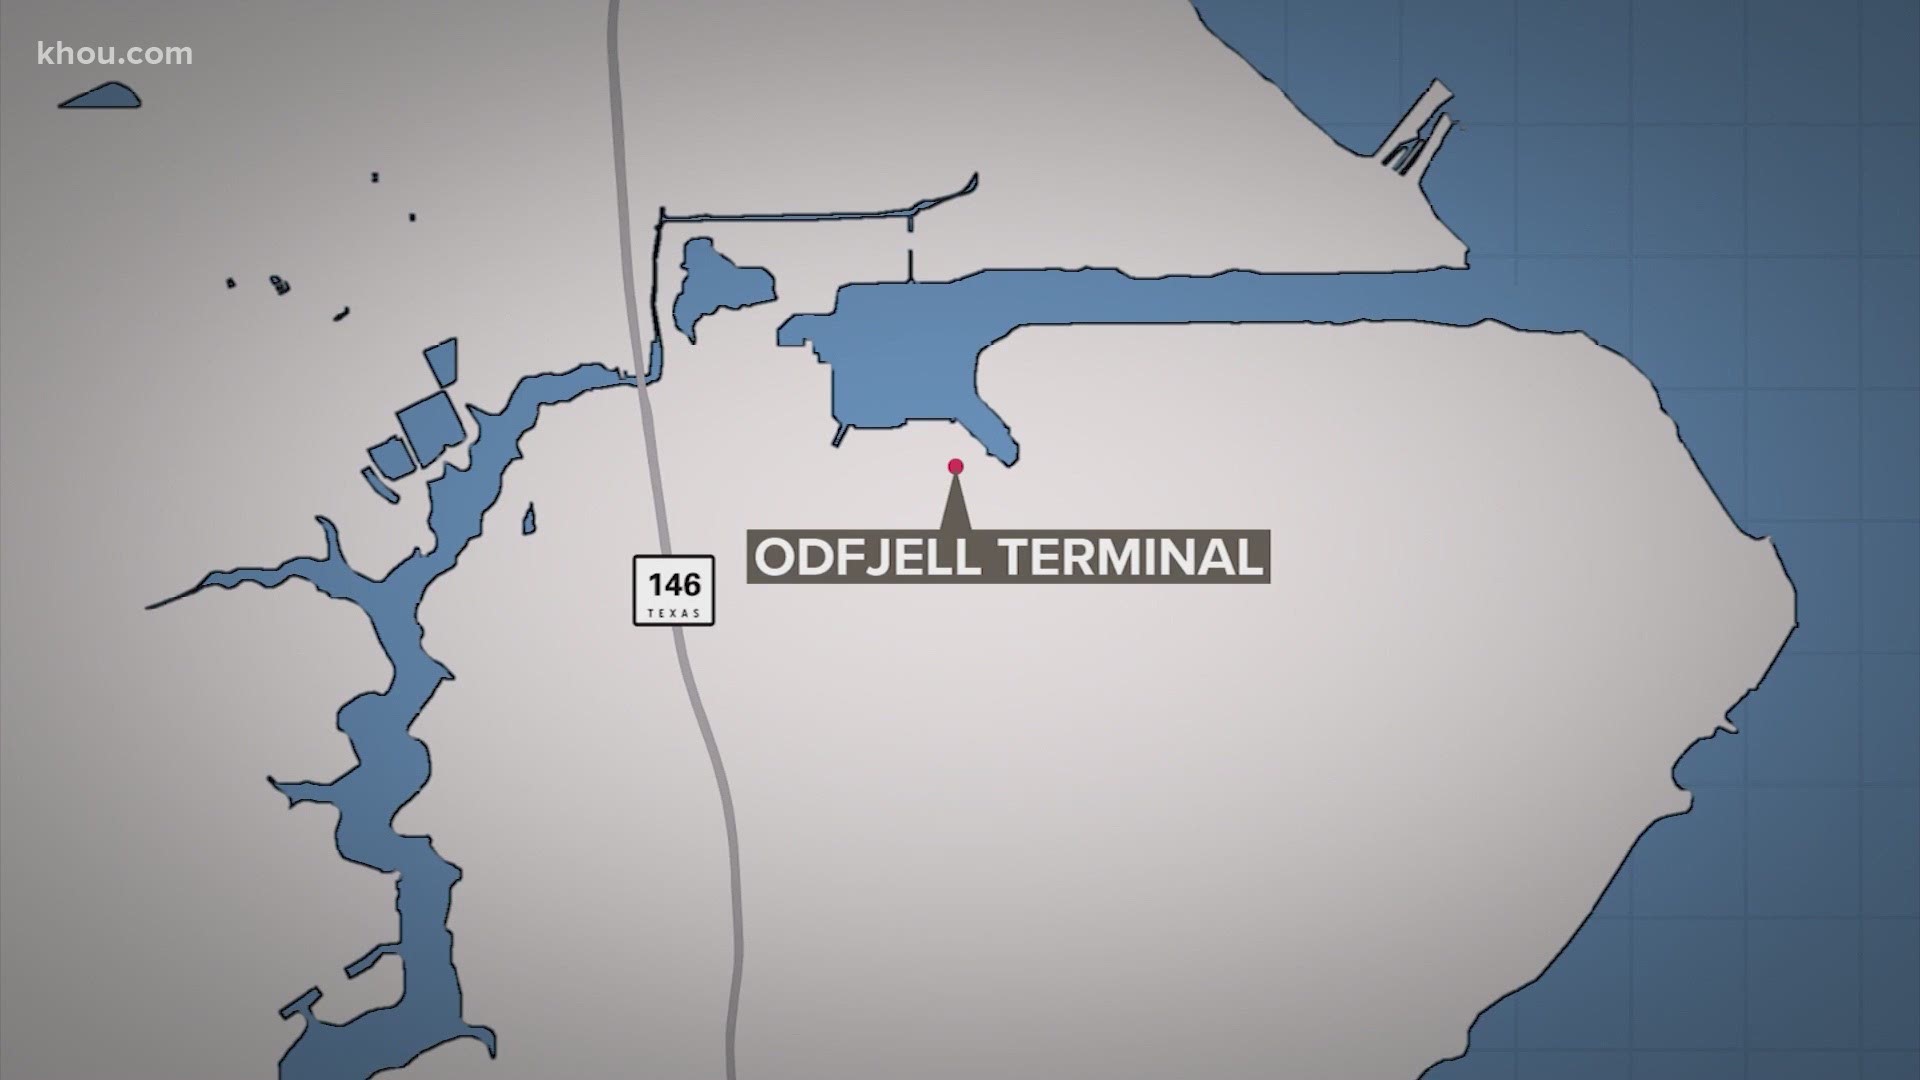 The order was issued because of a fire at the Odfjell Terminal Houston facility on Port Road.